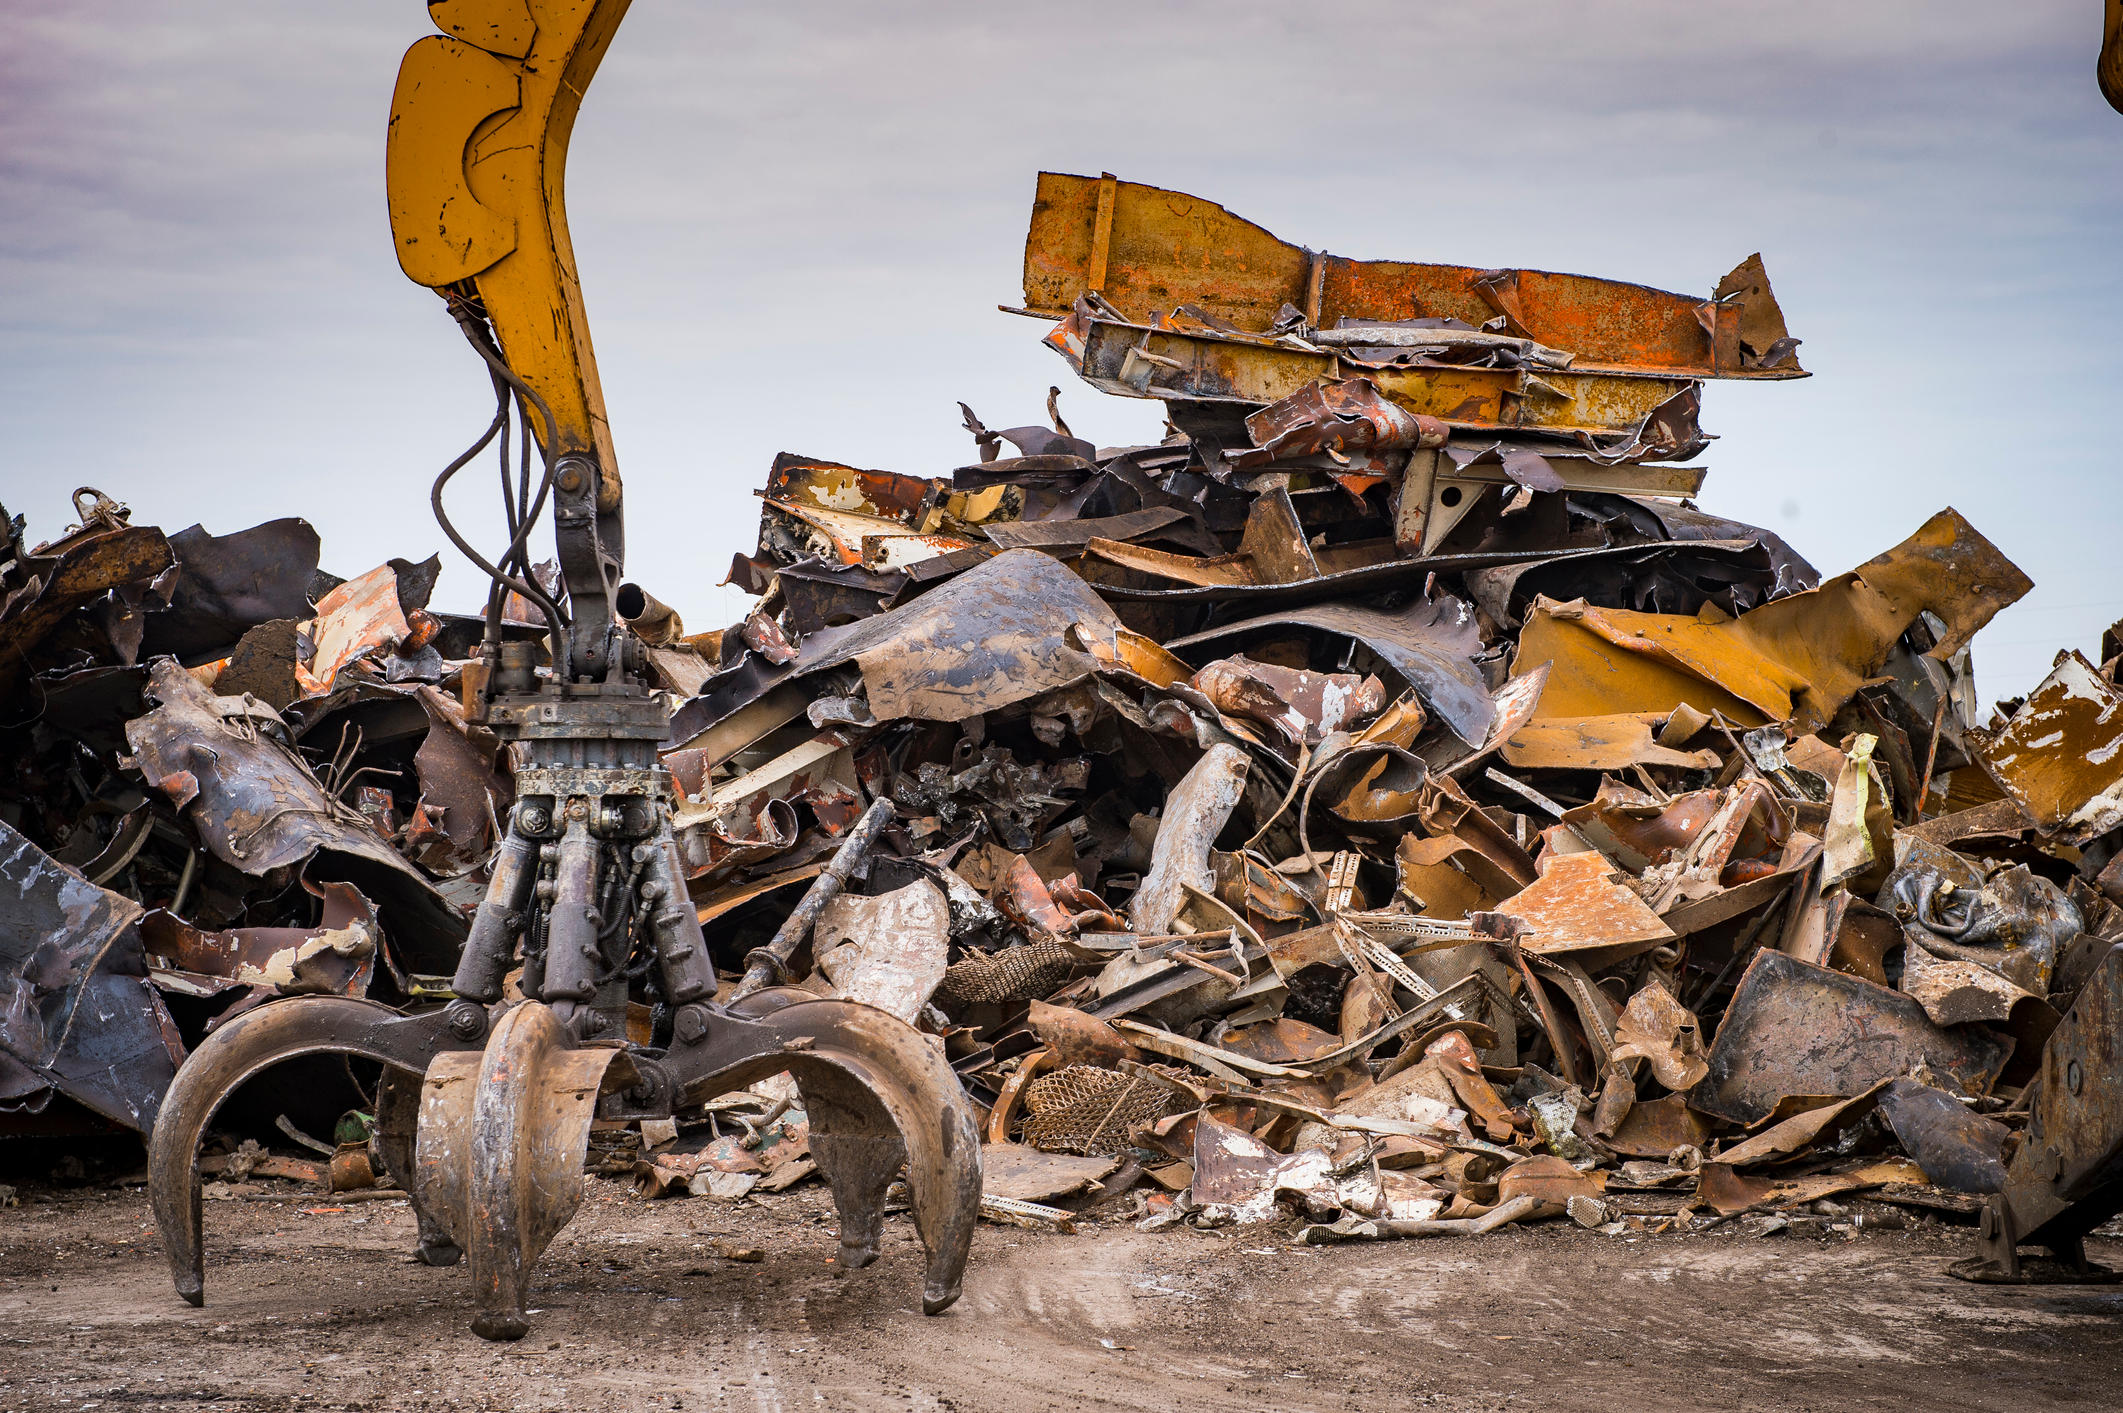 To get a quote from us – you can call us, or email us, or fill out the form on our website. Gershow Recyling Corporation Huntington Station (631)385-1200